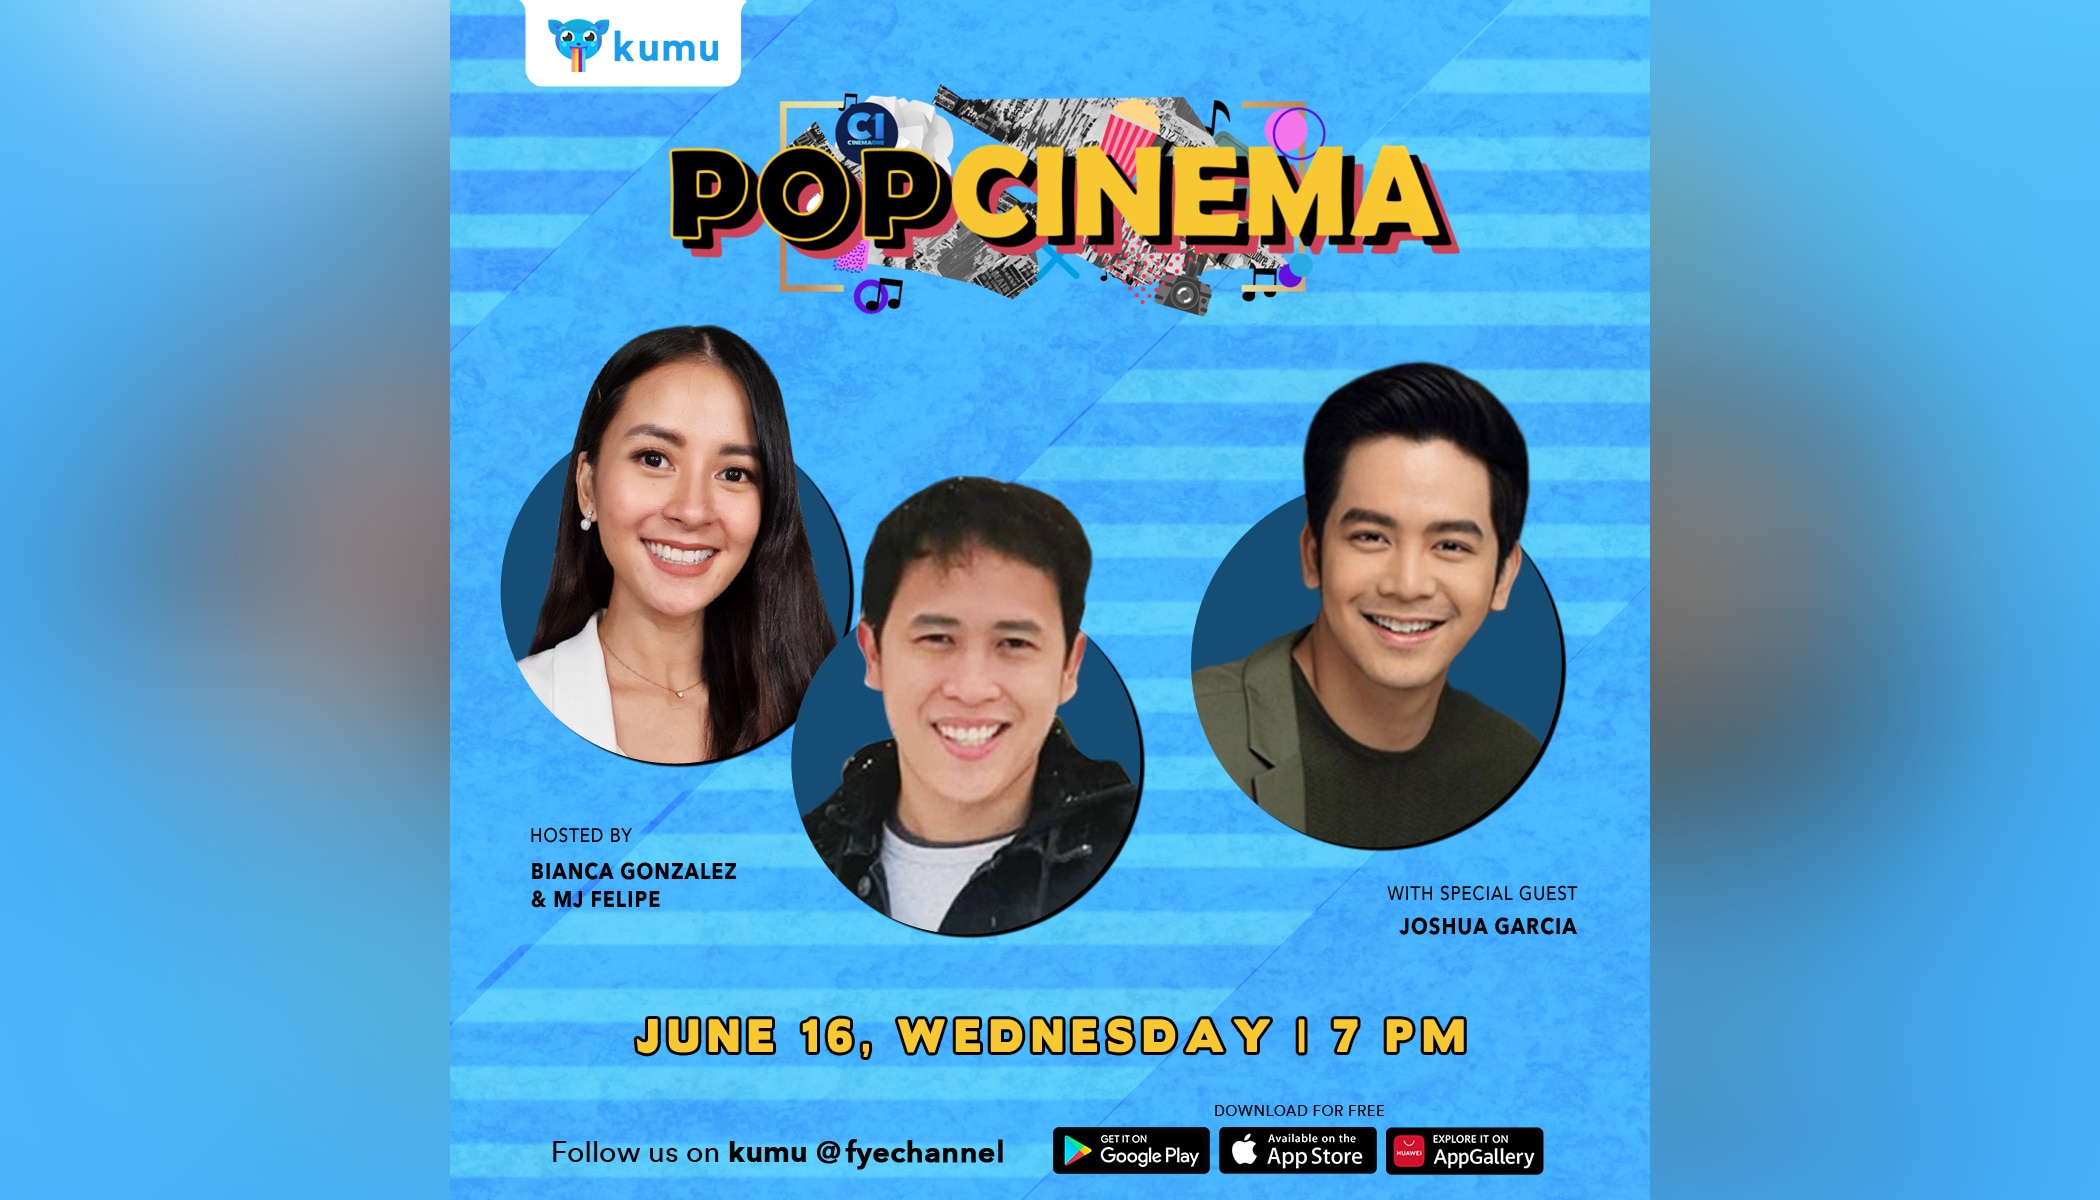 Bianca and MJ to chat with Joshua Garcia on "PopCinema" S3 premiere